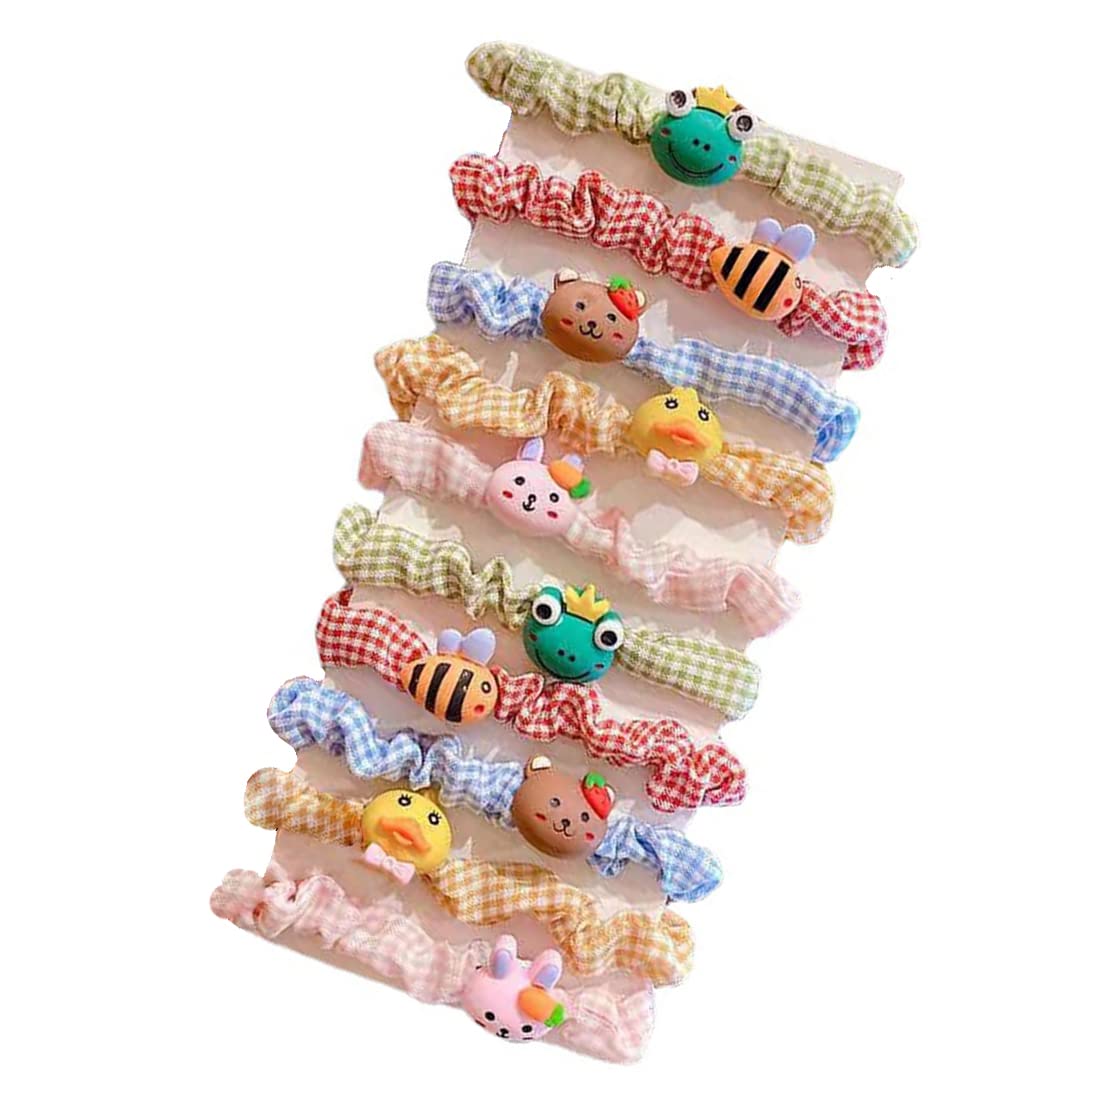 Melbees by Yellow Chimes Hair Rubber Bands for Girls Kids Hair Accessories for Girls Rubberbands Pony Holders 10 Pcs Multicolor Cute Charm Small Ponytail Holders for Girls Kids Teens Toddlers